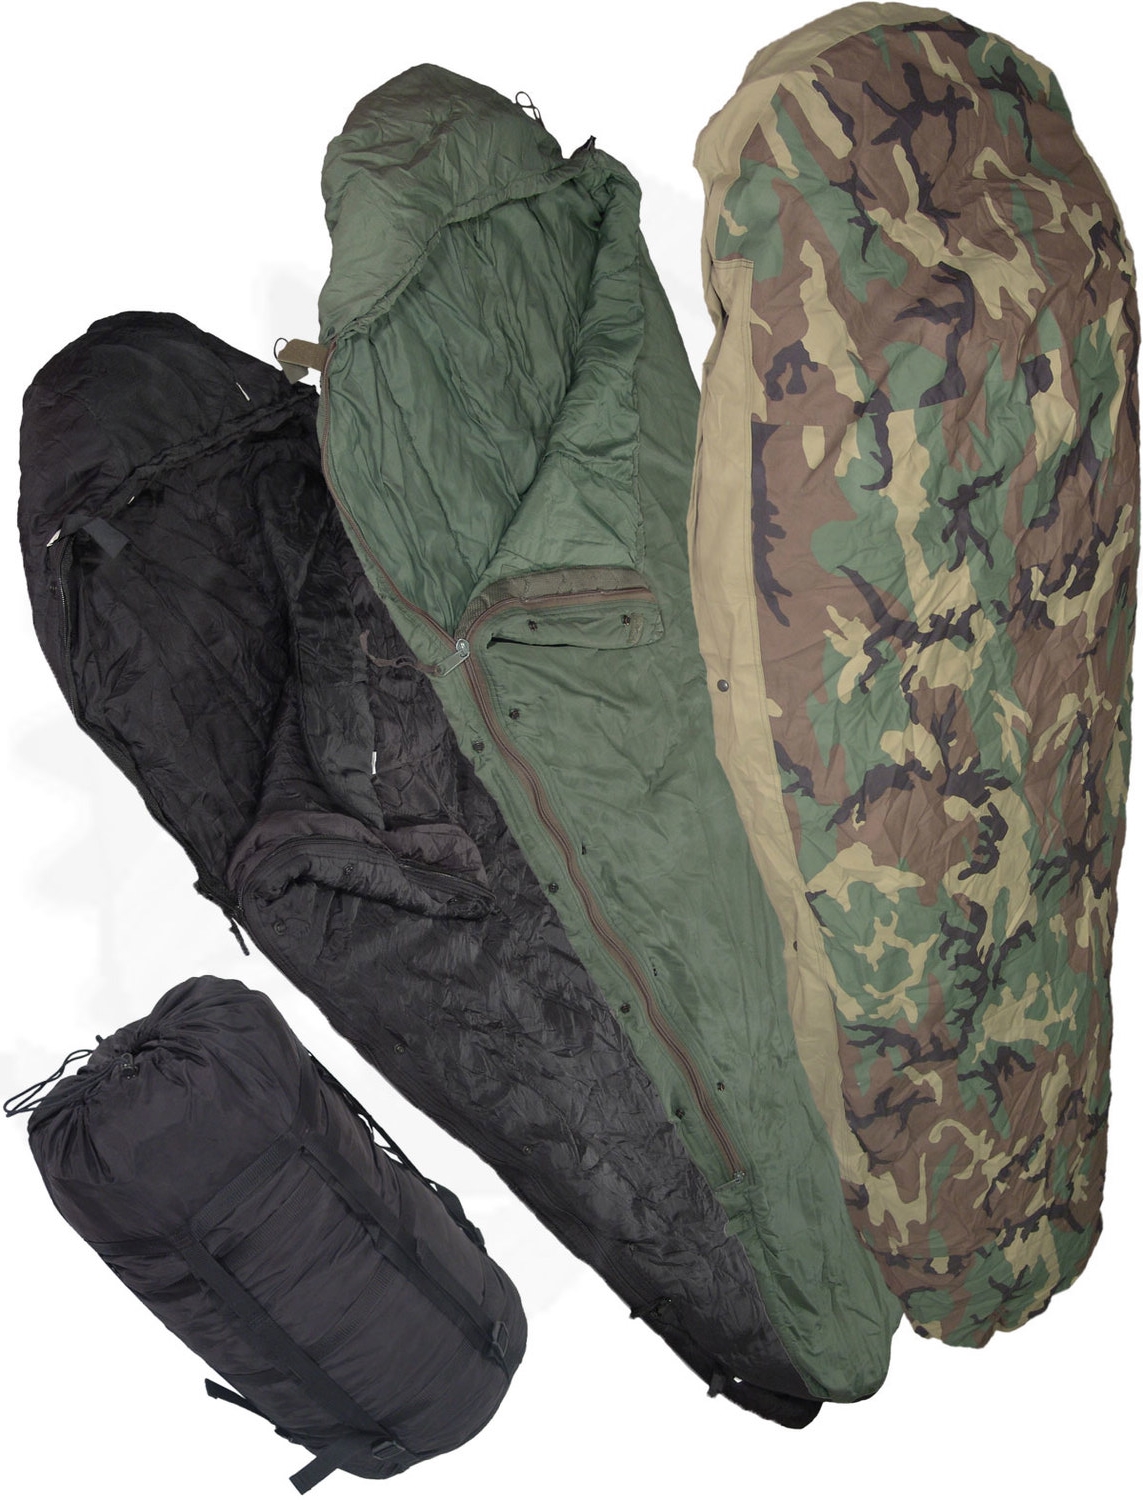 New US Army Military Woodland Camo Sleep System Carrier Bag MOLLE MSS Bivy Sack 